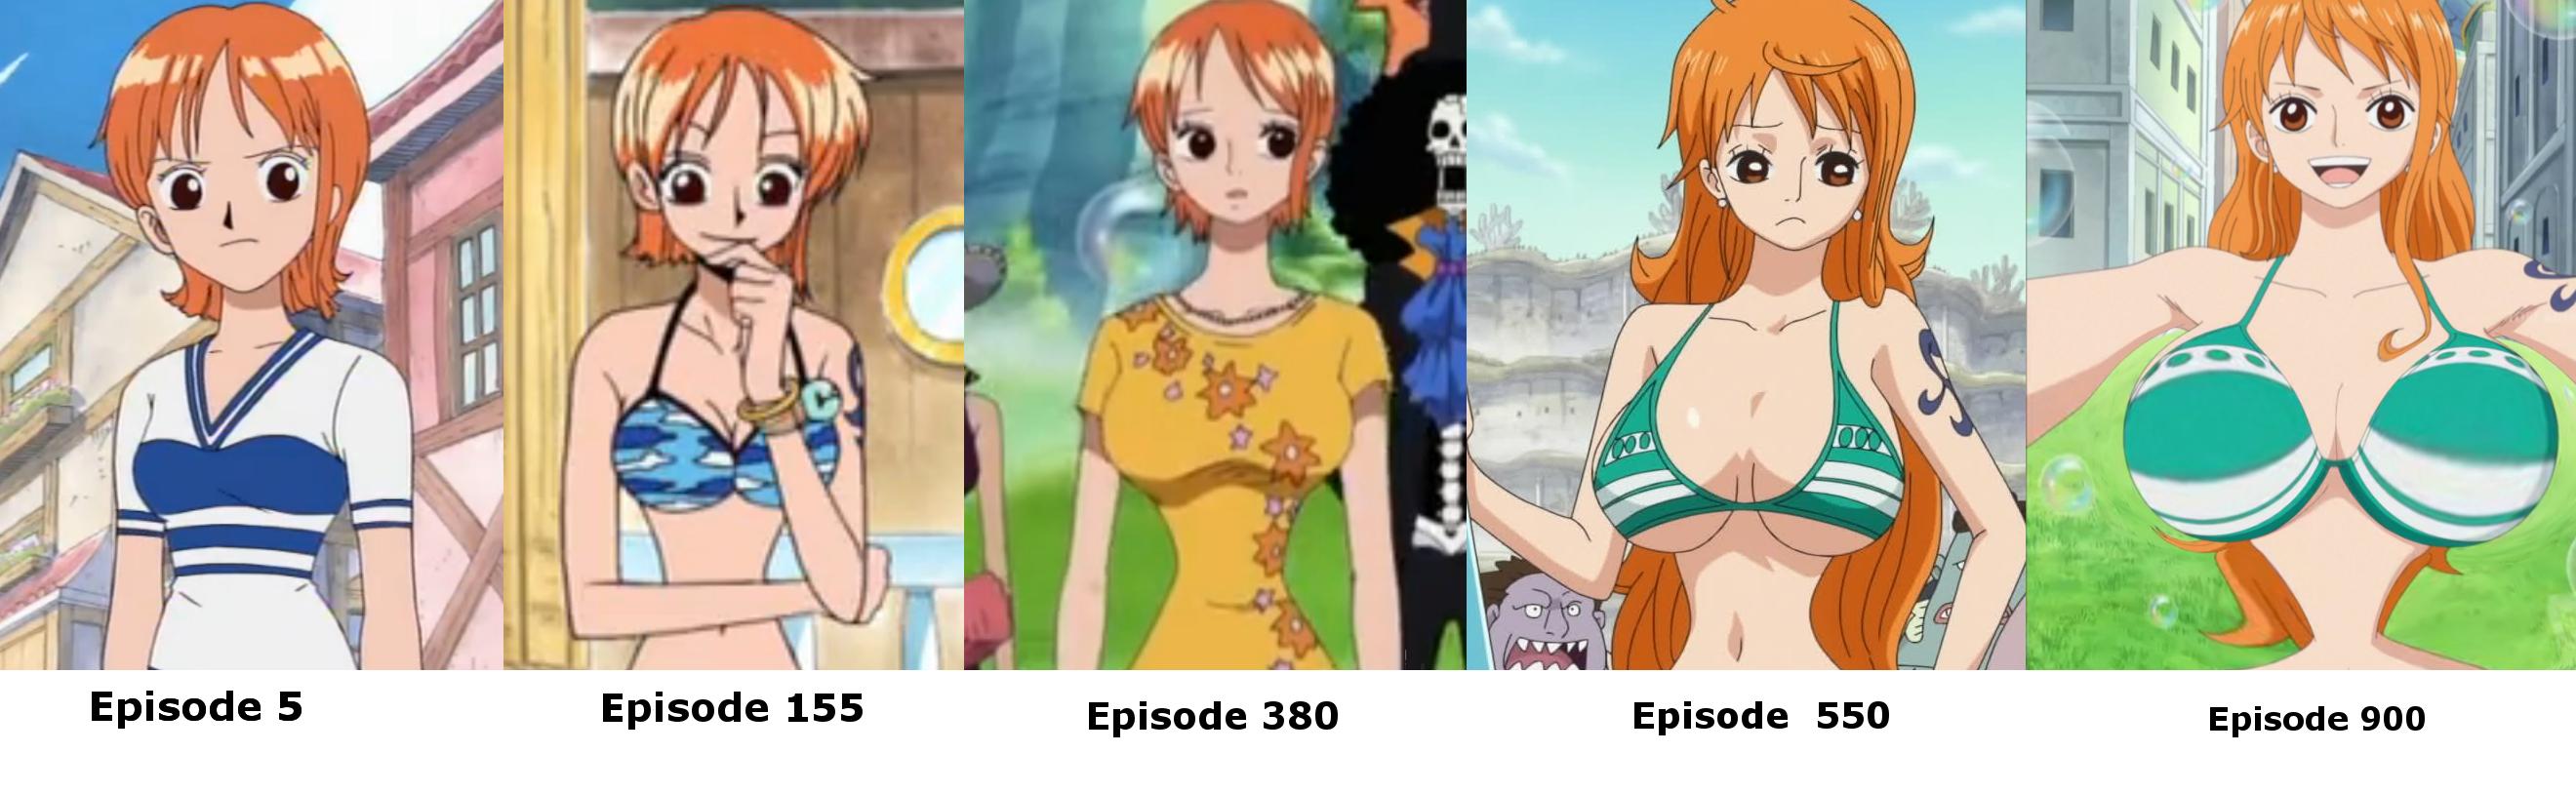 p.s. you can see how nami has evolved over the years at 900 she'll be ...